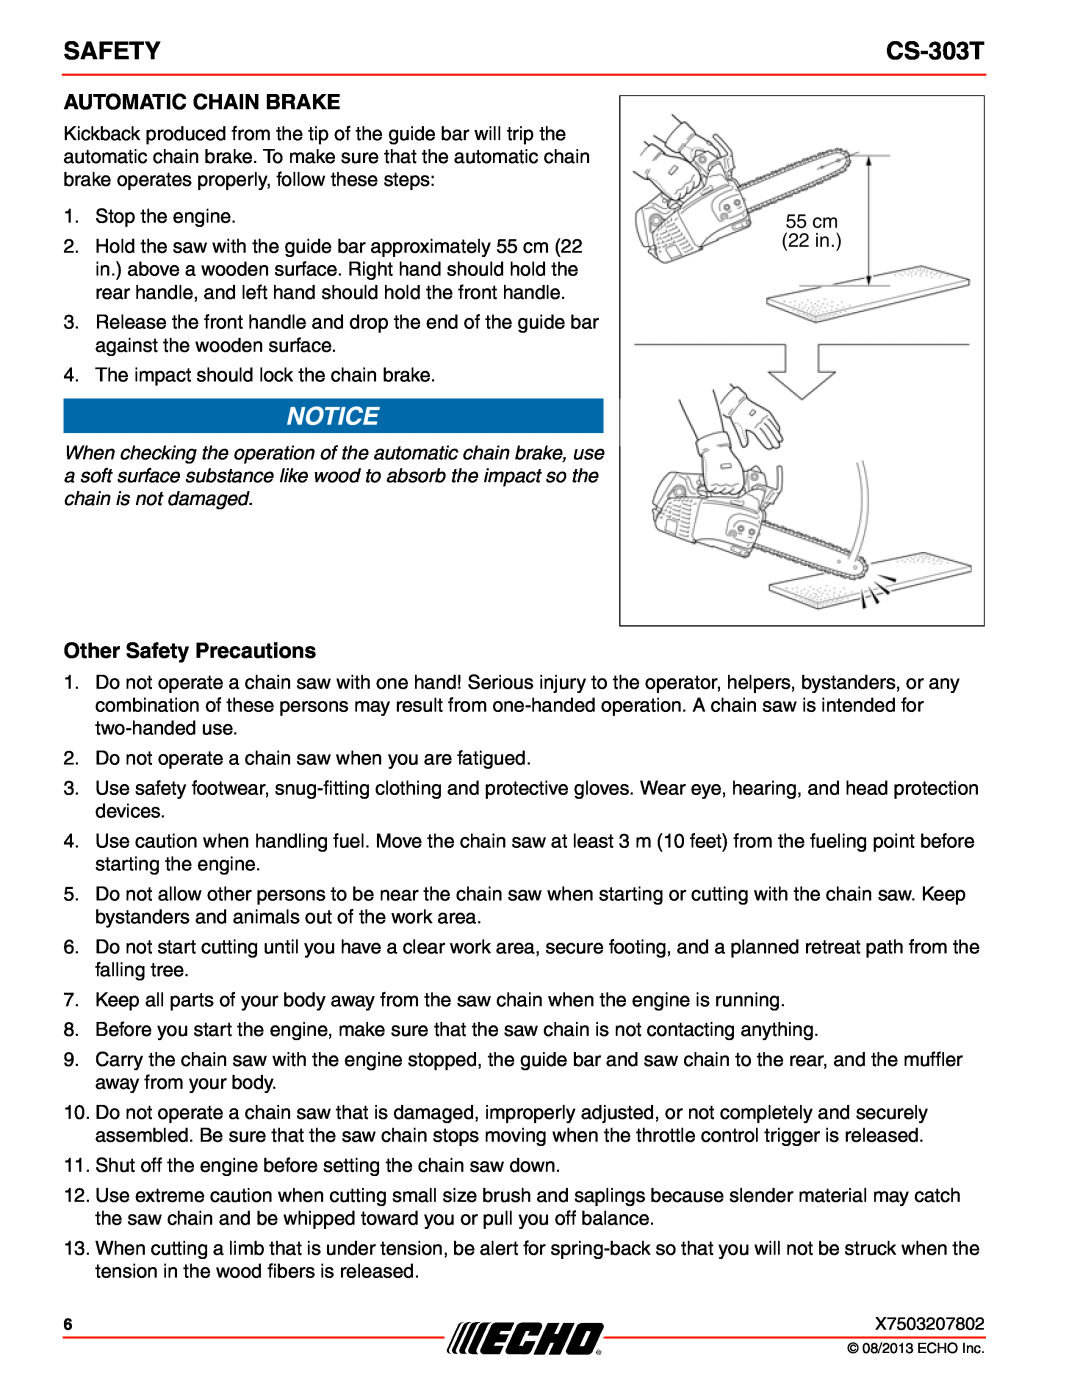 Echo CS-303T instruction manual Automatic Chain Brake, Other Safety Precautions 